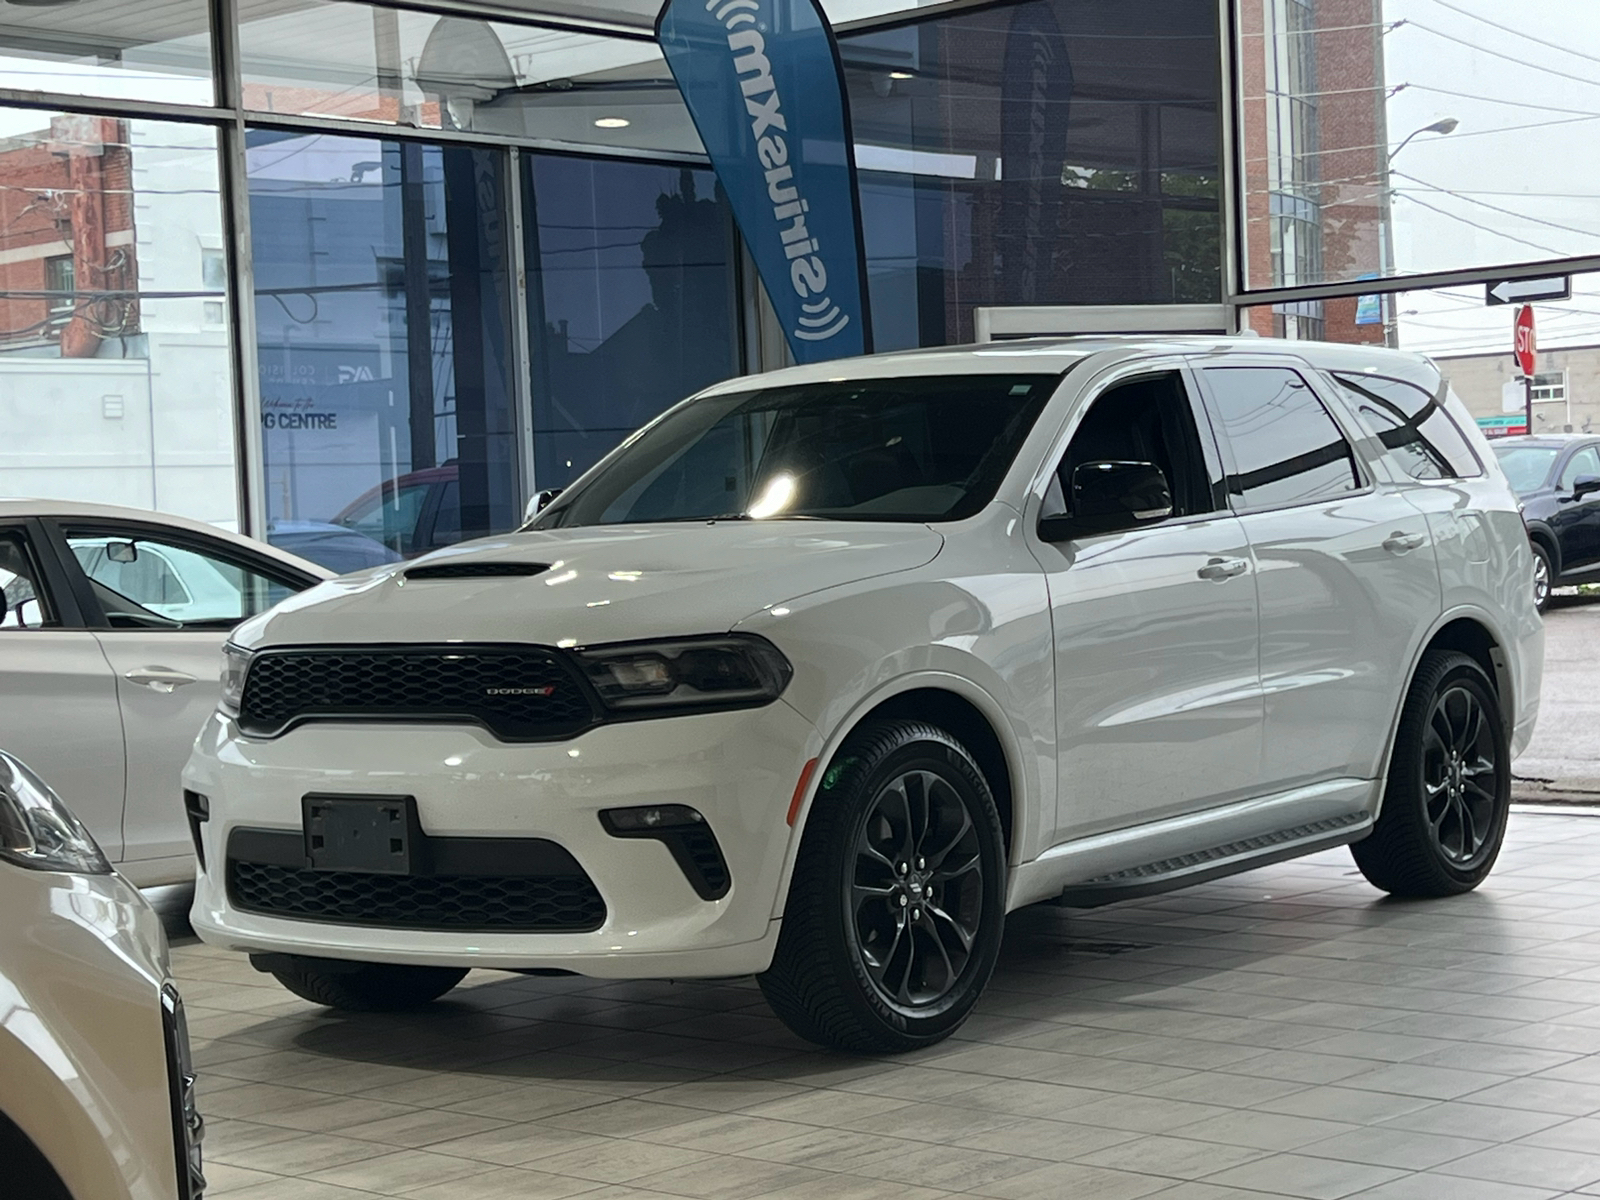 2021 Dodge Durango GT - AWD - No Accidents - One Owner - Well Service